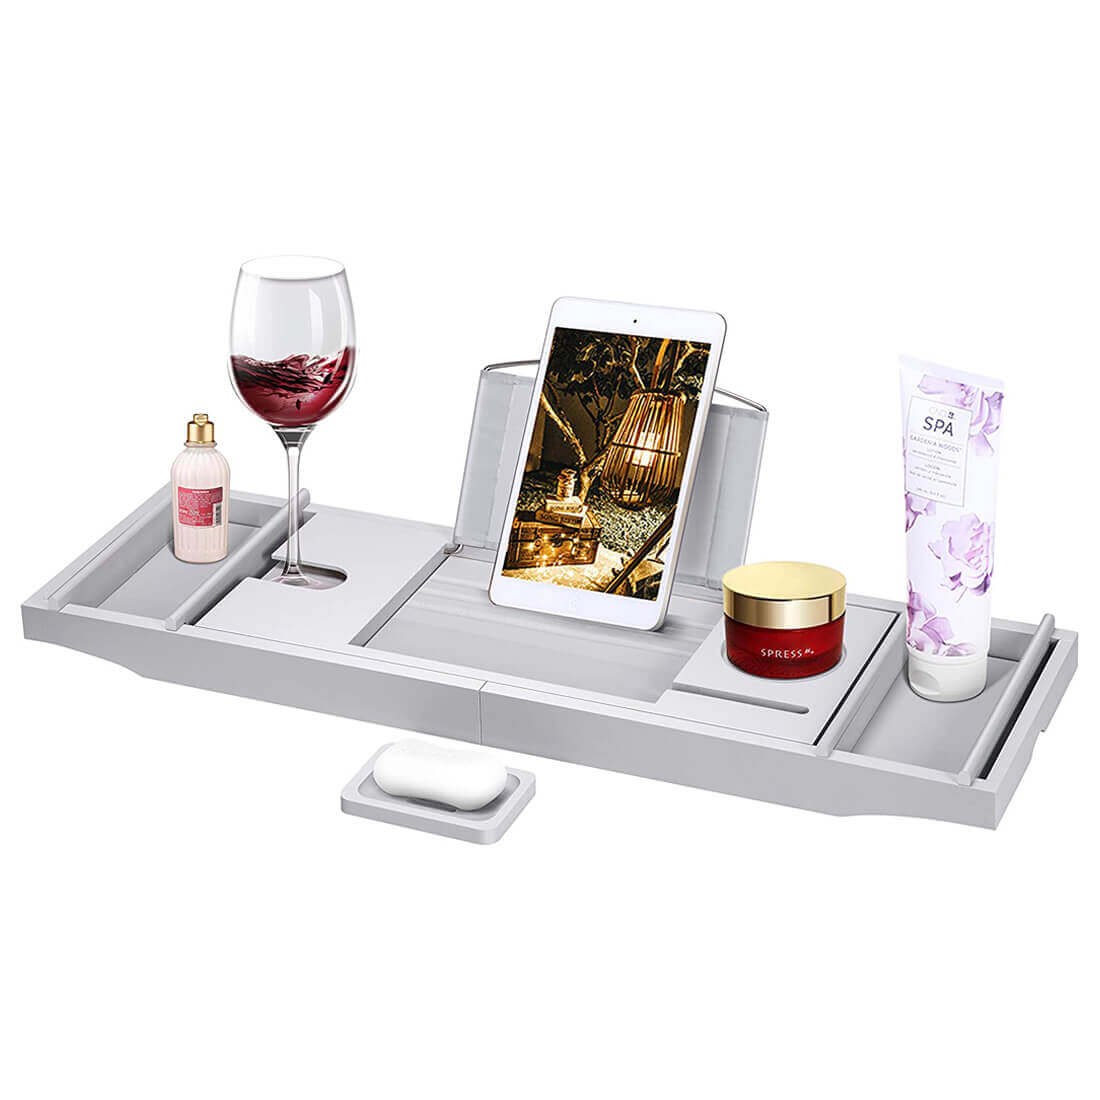  VIVOHOME Expandable 43 Inch Bamboo Bathtub Caddy Tray with Smartphone Tablet Book Holders, Soap Tray, Wine Glass Slot, Gray